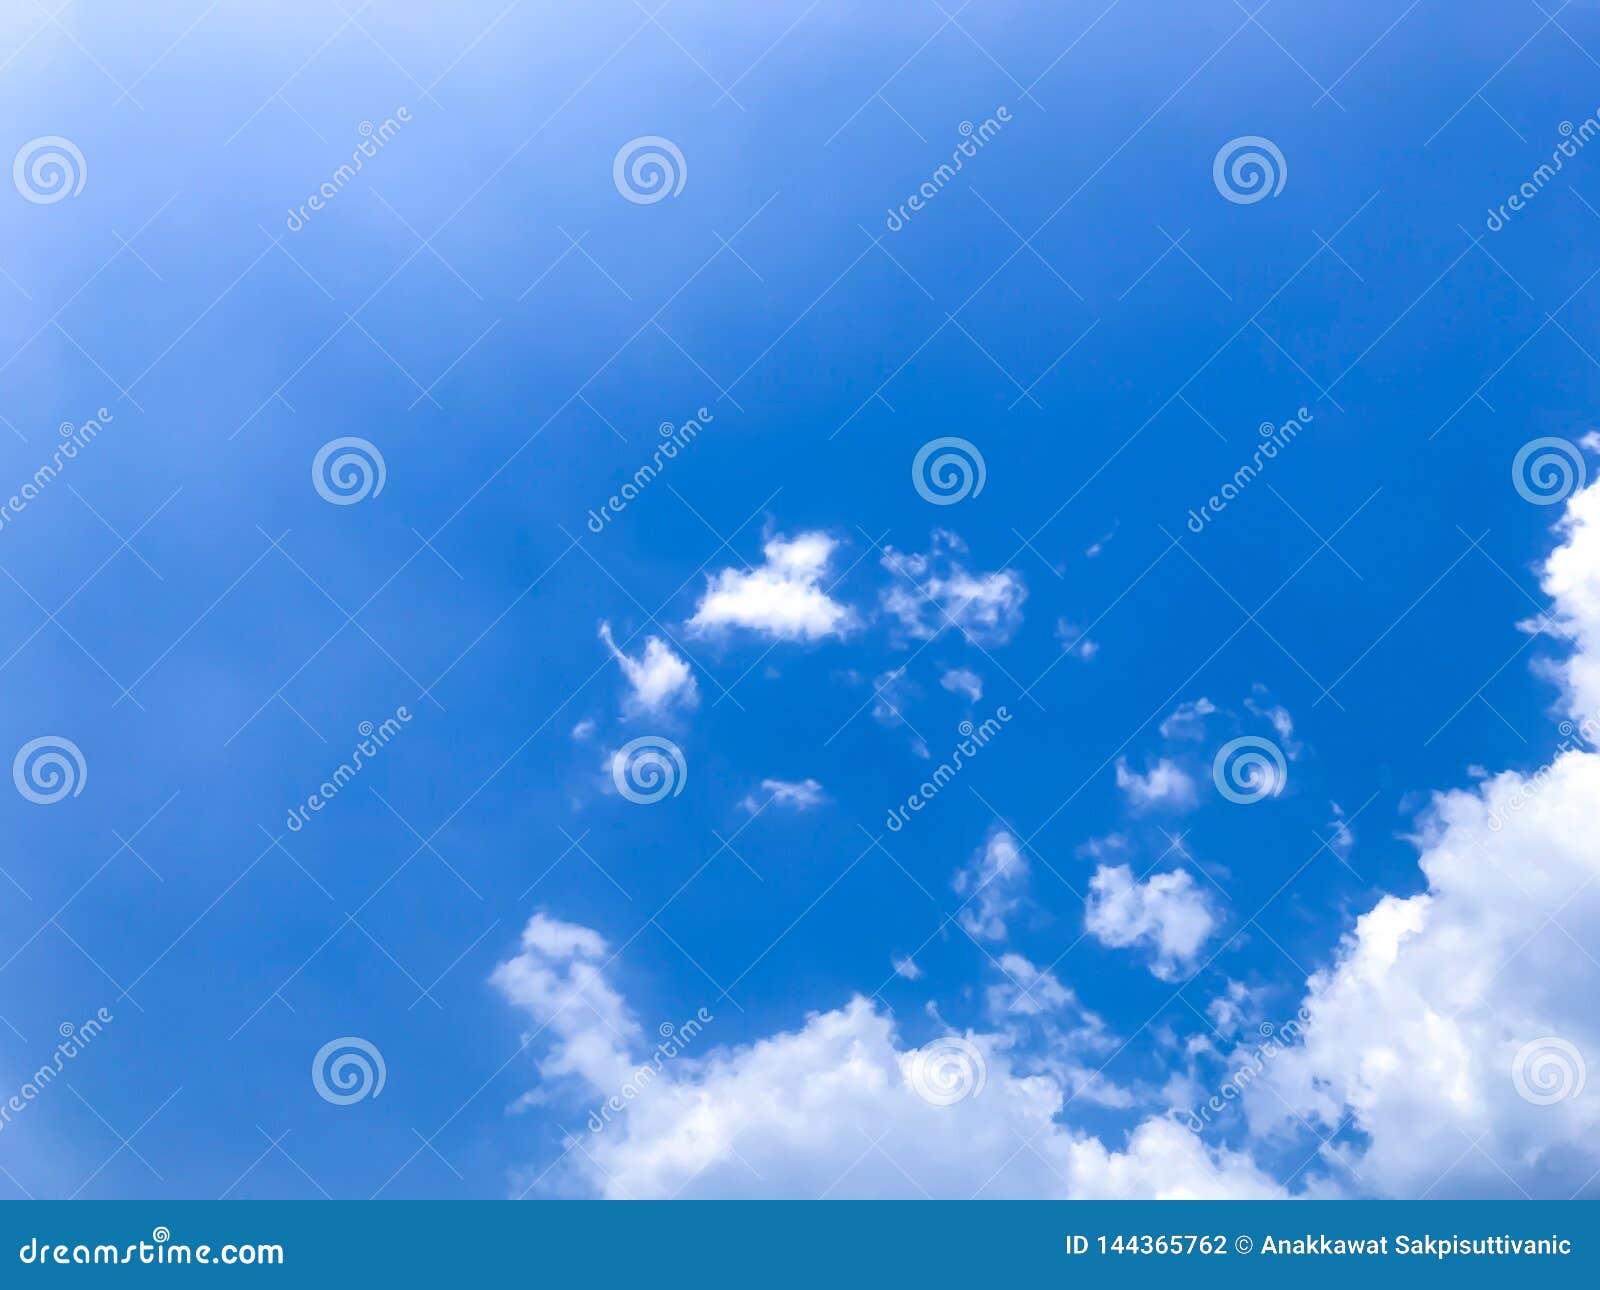 The Bright Blue Sky, White Clouds and Soft Wind Blowing in the Summer ...